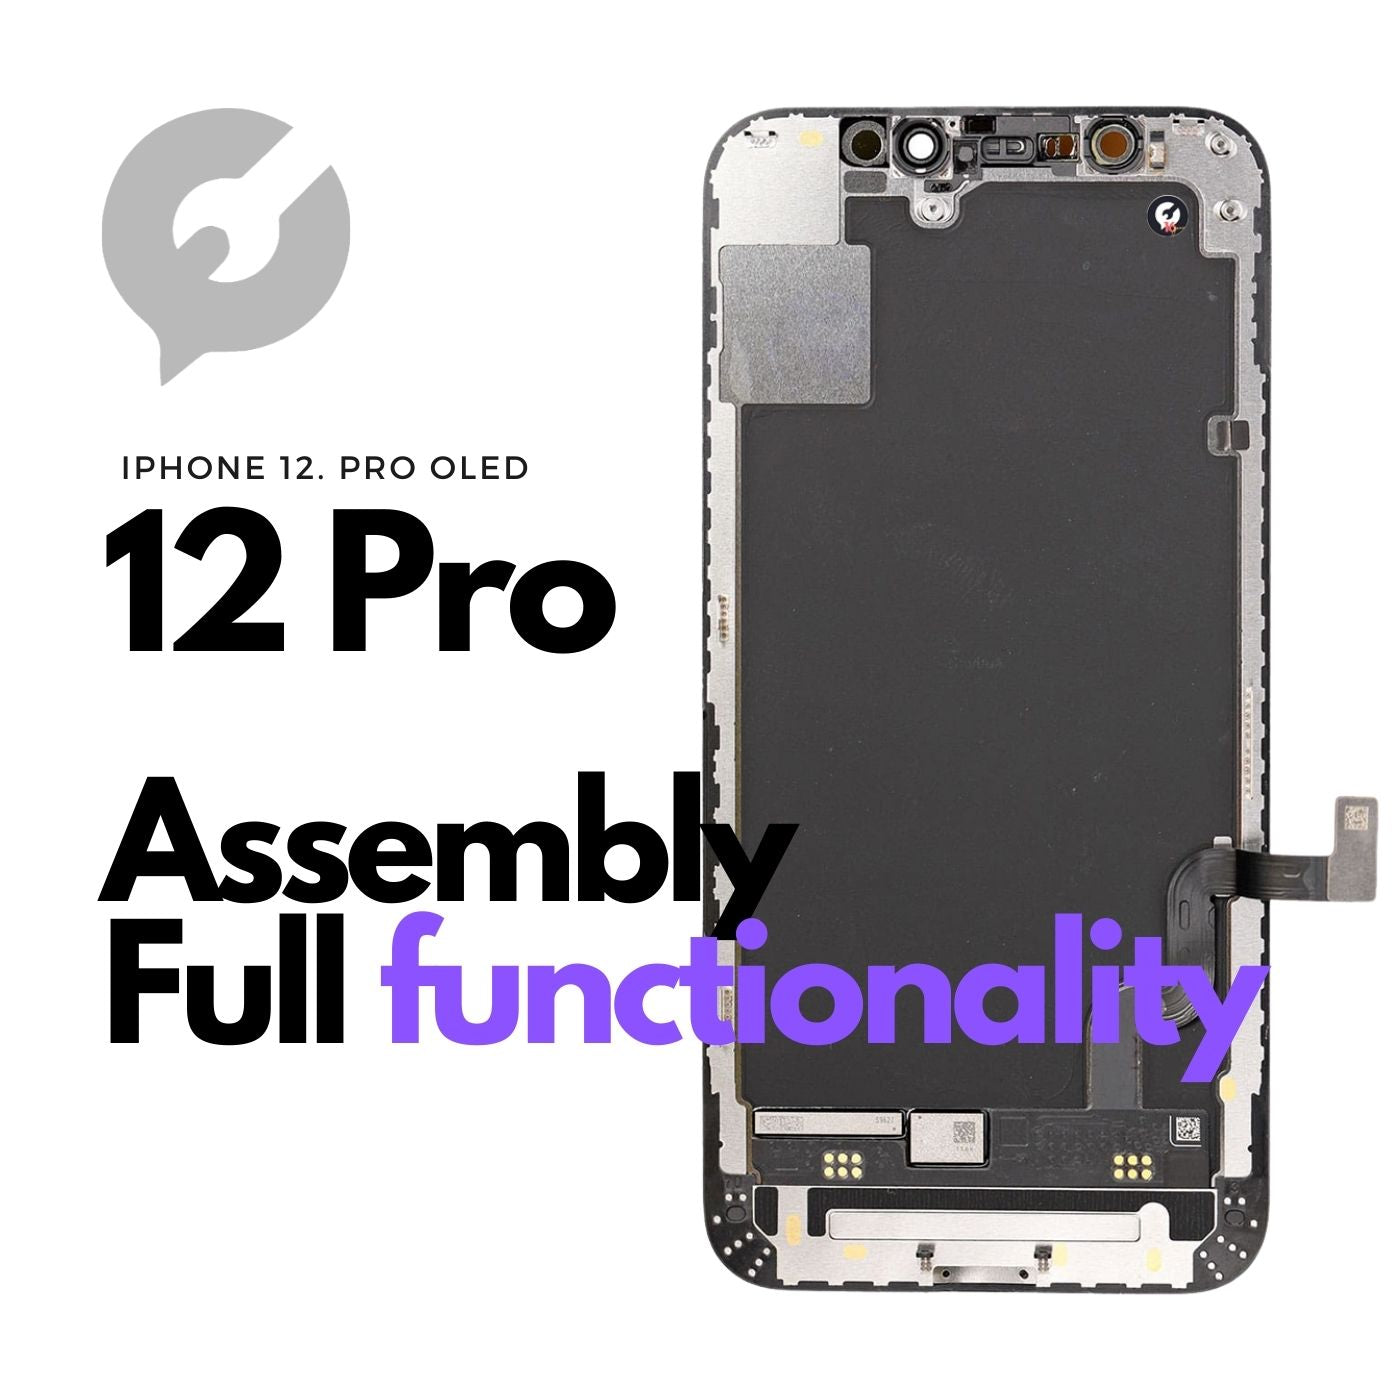 12 Pro Assembly Full Functionality